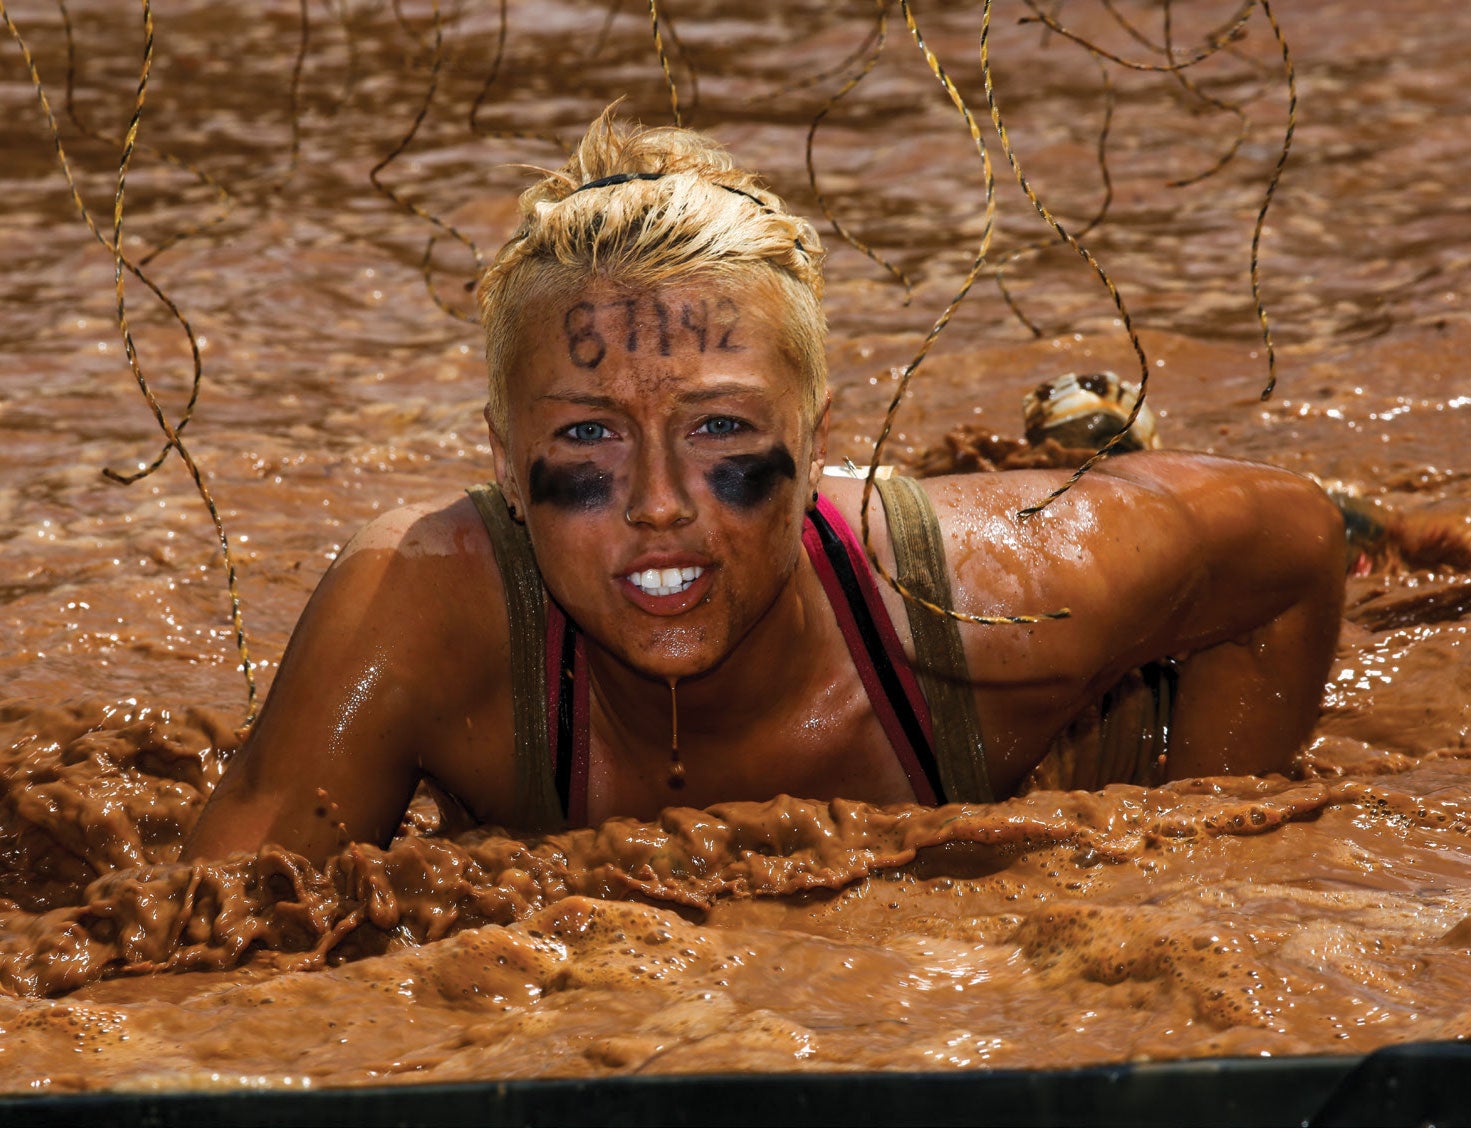 Train For An Obstacle Race With This 6-Week Plan